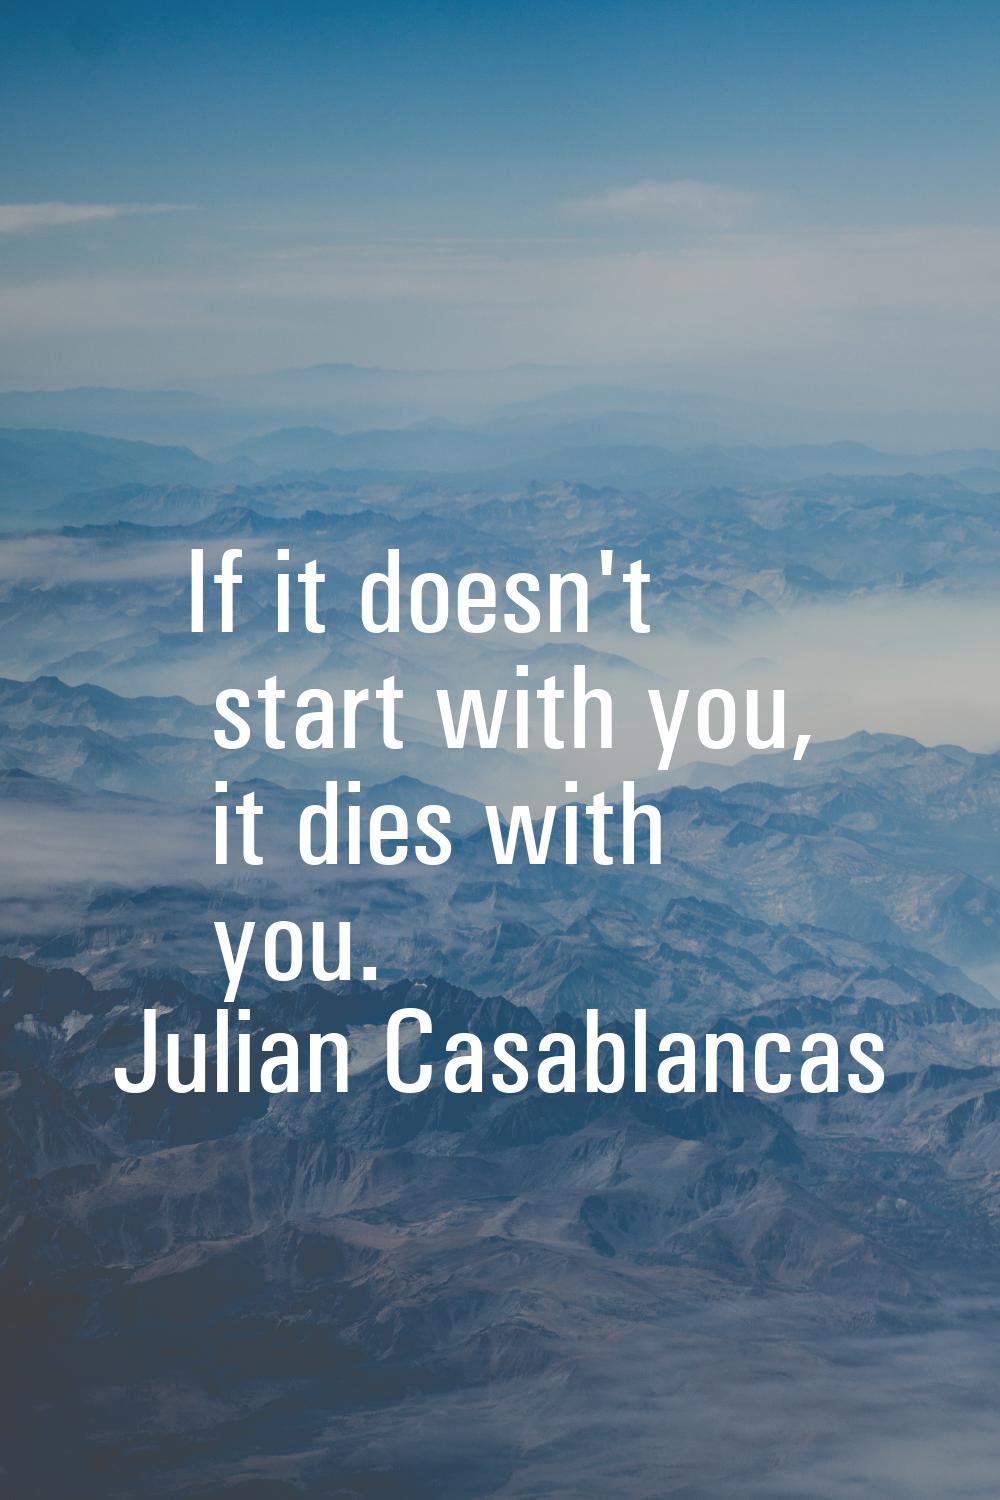 If it doesn't start with you, it dies with you.